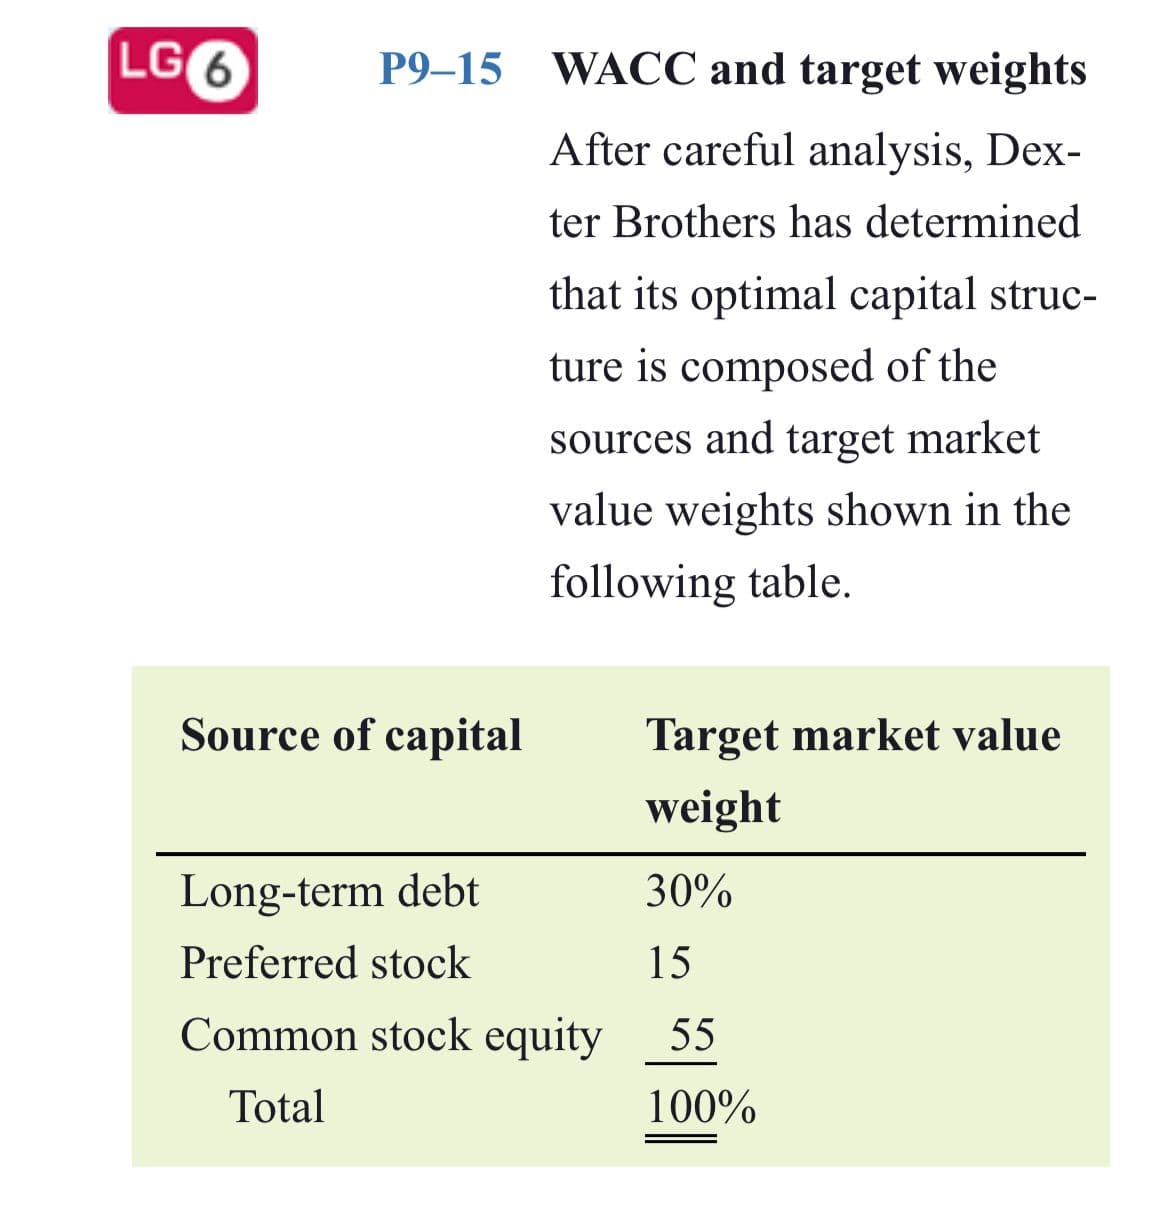 LG6
P9–15 WACC and target weights
After careful analysis, Dex-
ter Brothers has determined
that its optimal capital struc-
ture is composed of the
sources and target market
value weights shown in the
following table.
Source of capital
Target market value
weight
Long-term debt
30%
Preferred stock
15
Common stock equity
55
Total
100%
